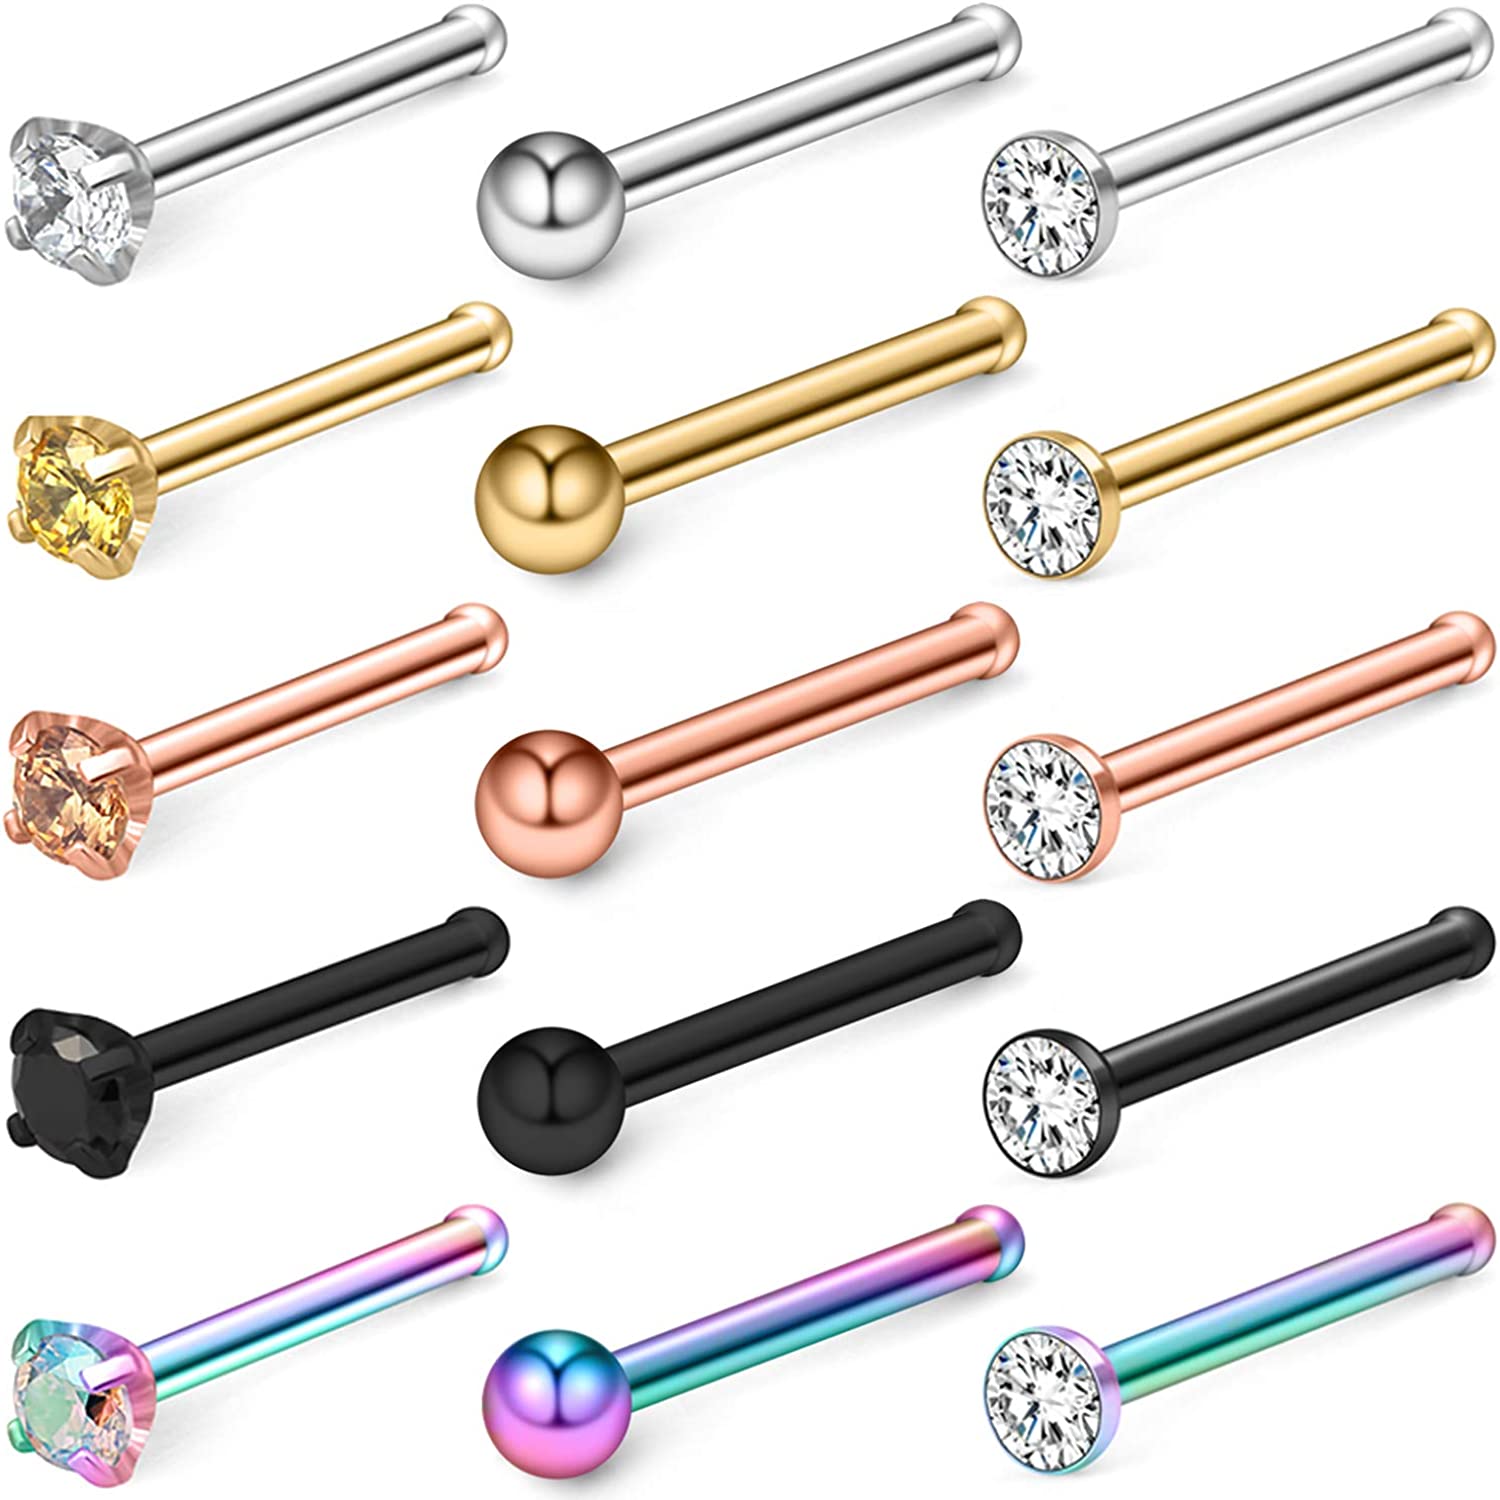 Lcolyoli Nose Ring 20 Gauge Surgical Steel Nose Stud Bone for Women Girl Body Piercing Jewelry with Clear Diamond Round CZ 15 Pieces Silver Ball 1.5mm Men Silver-Tone Rose Gold Black Ball